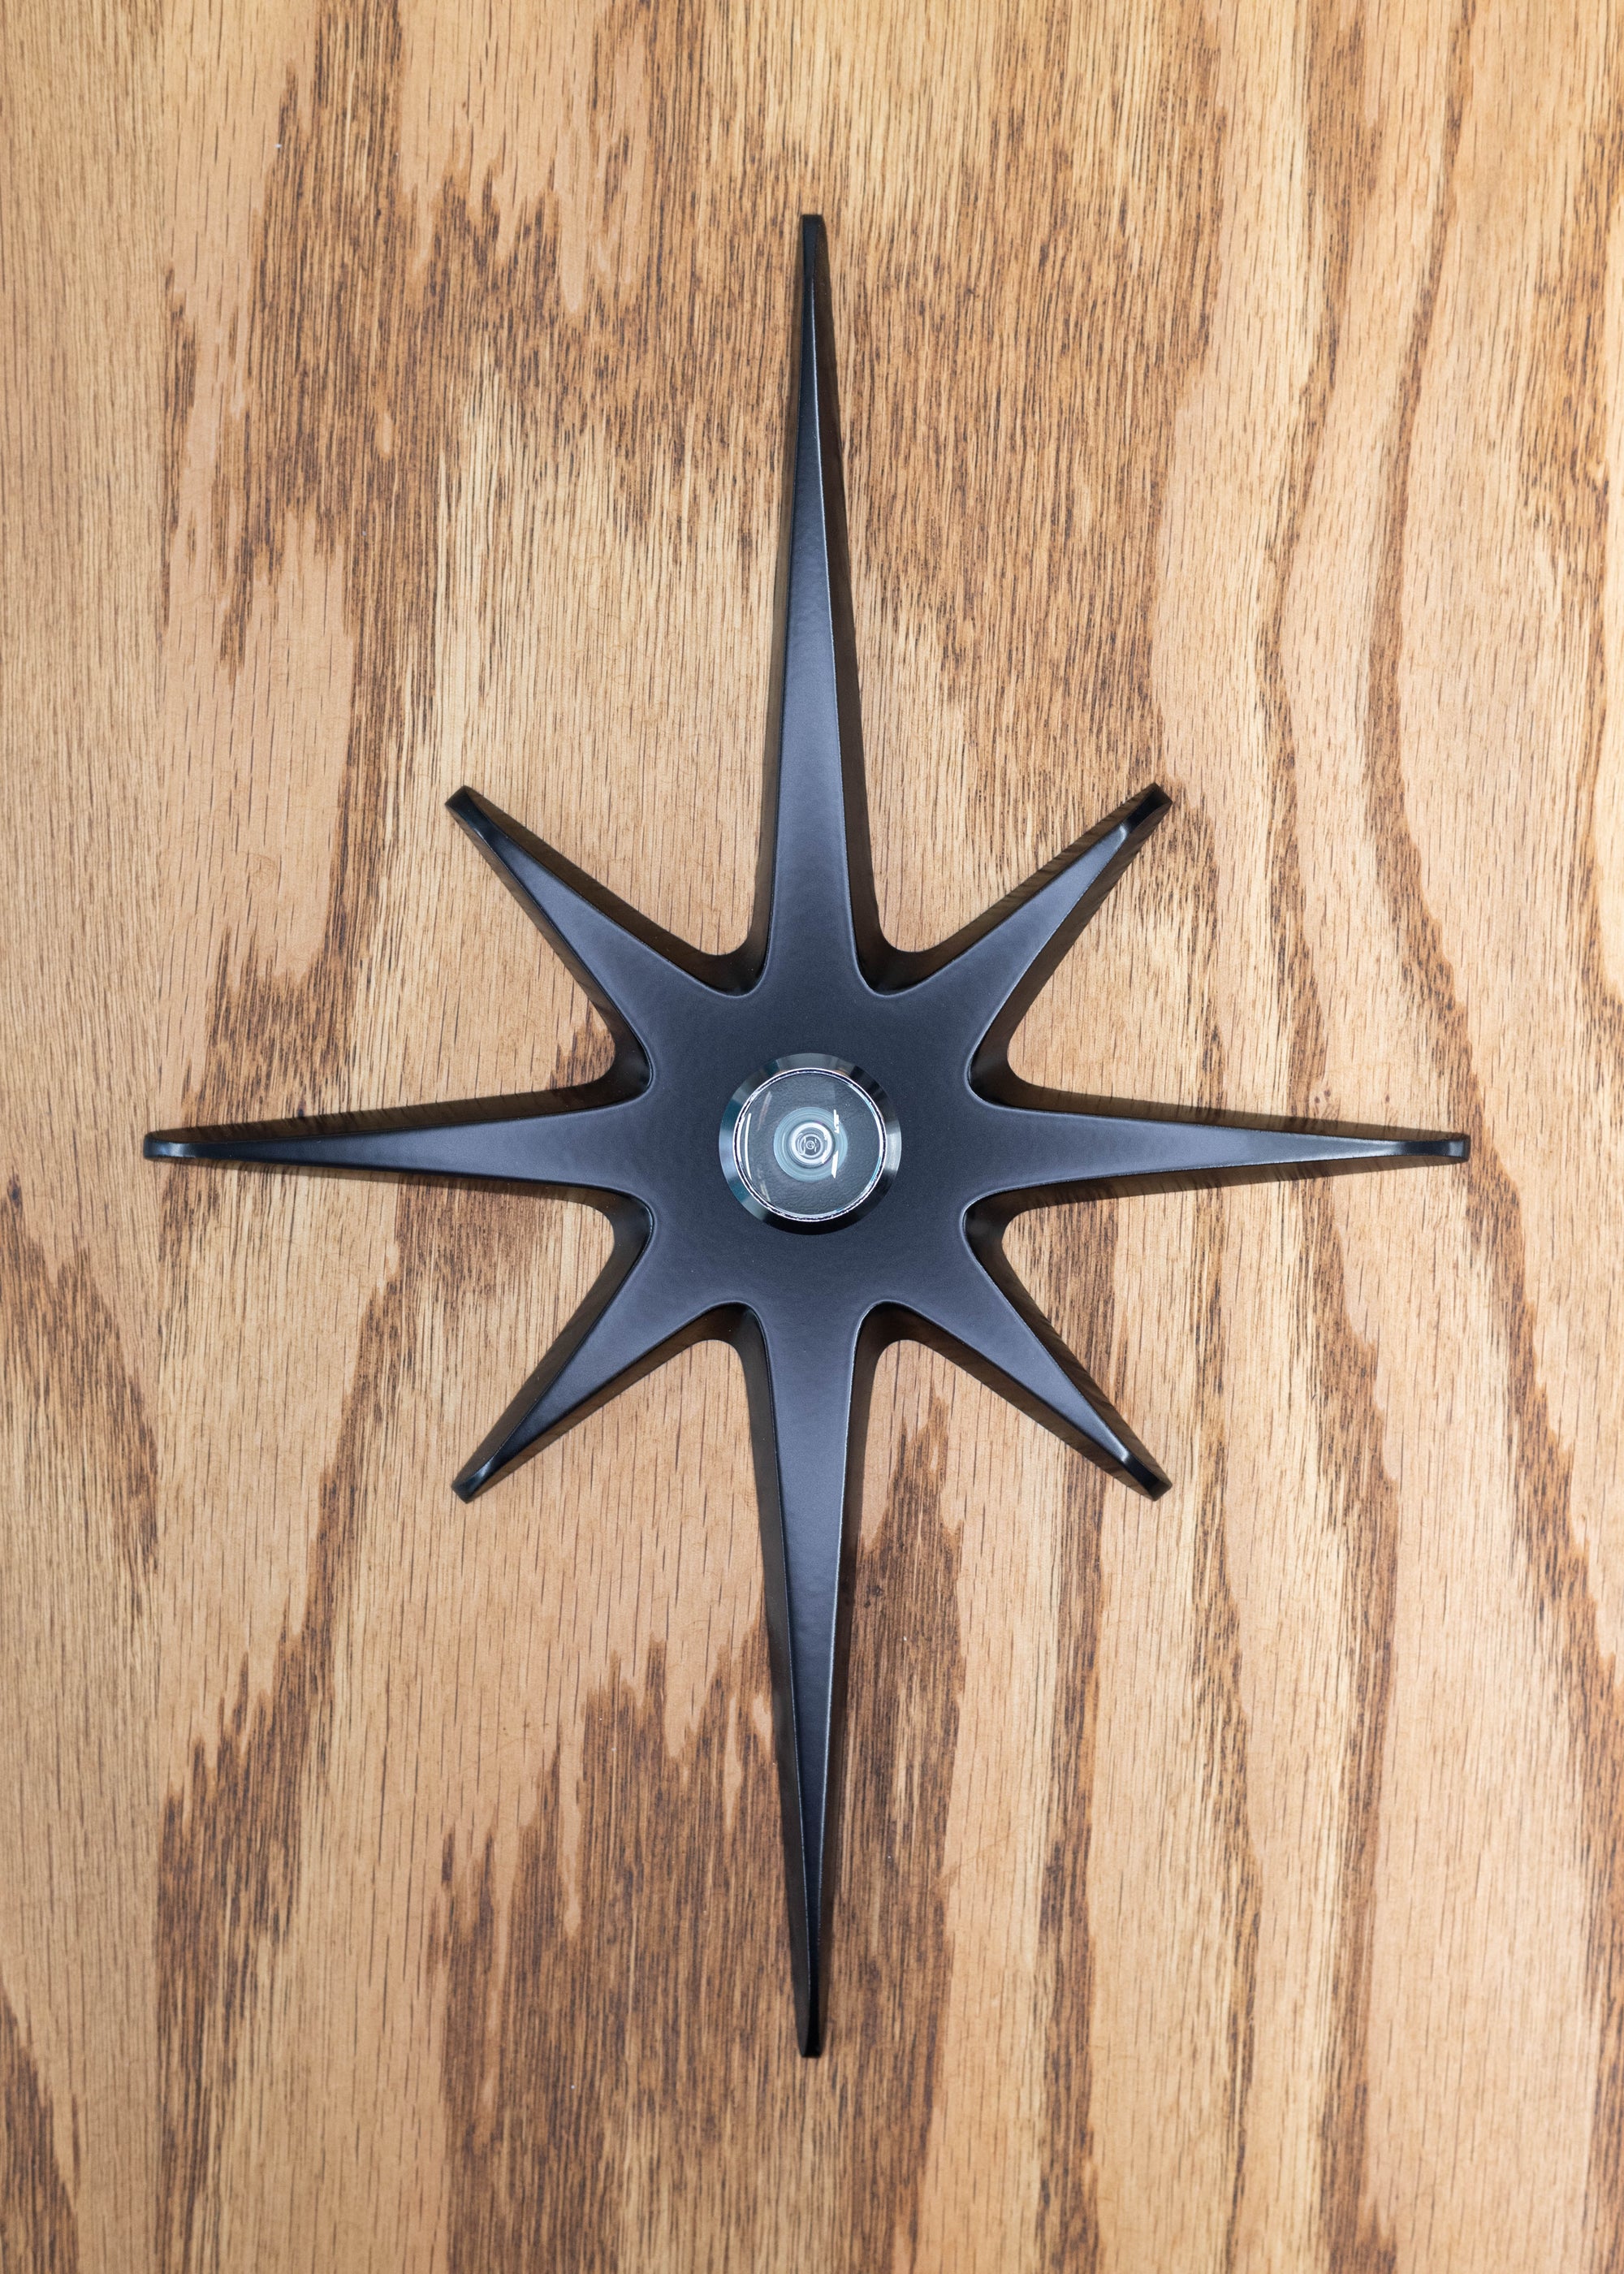 A large cast aluminum starburst with a peephole viewer in the center. The starburst has a black powder coating and the peephole is silver/chrome rimmed. The powder coat finish is matte, so it's not glossy with shine, but the surface is still smooth and gives slight reflection of light.